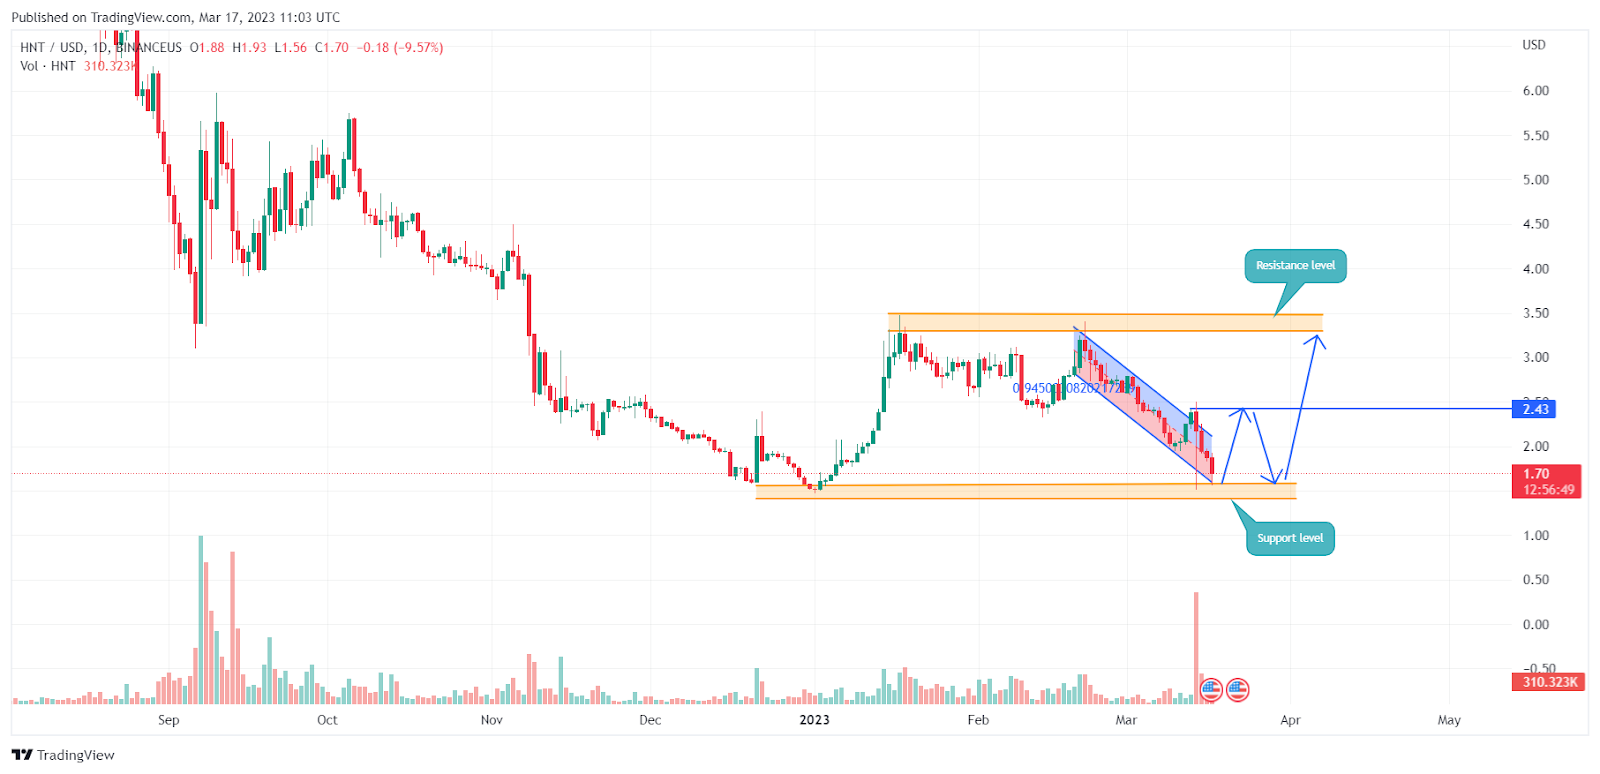 HNT keeps falling after Binance said it will delist the token - 2